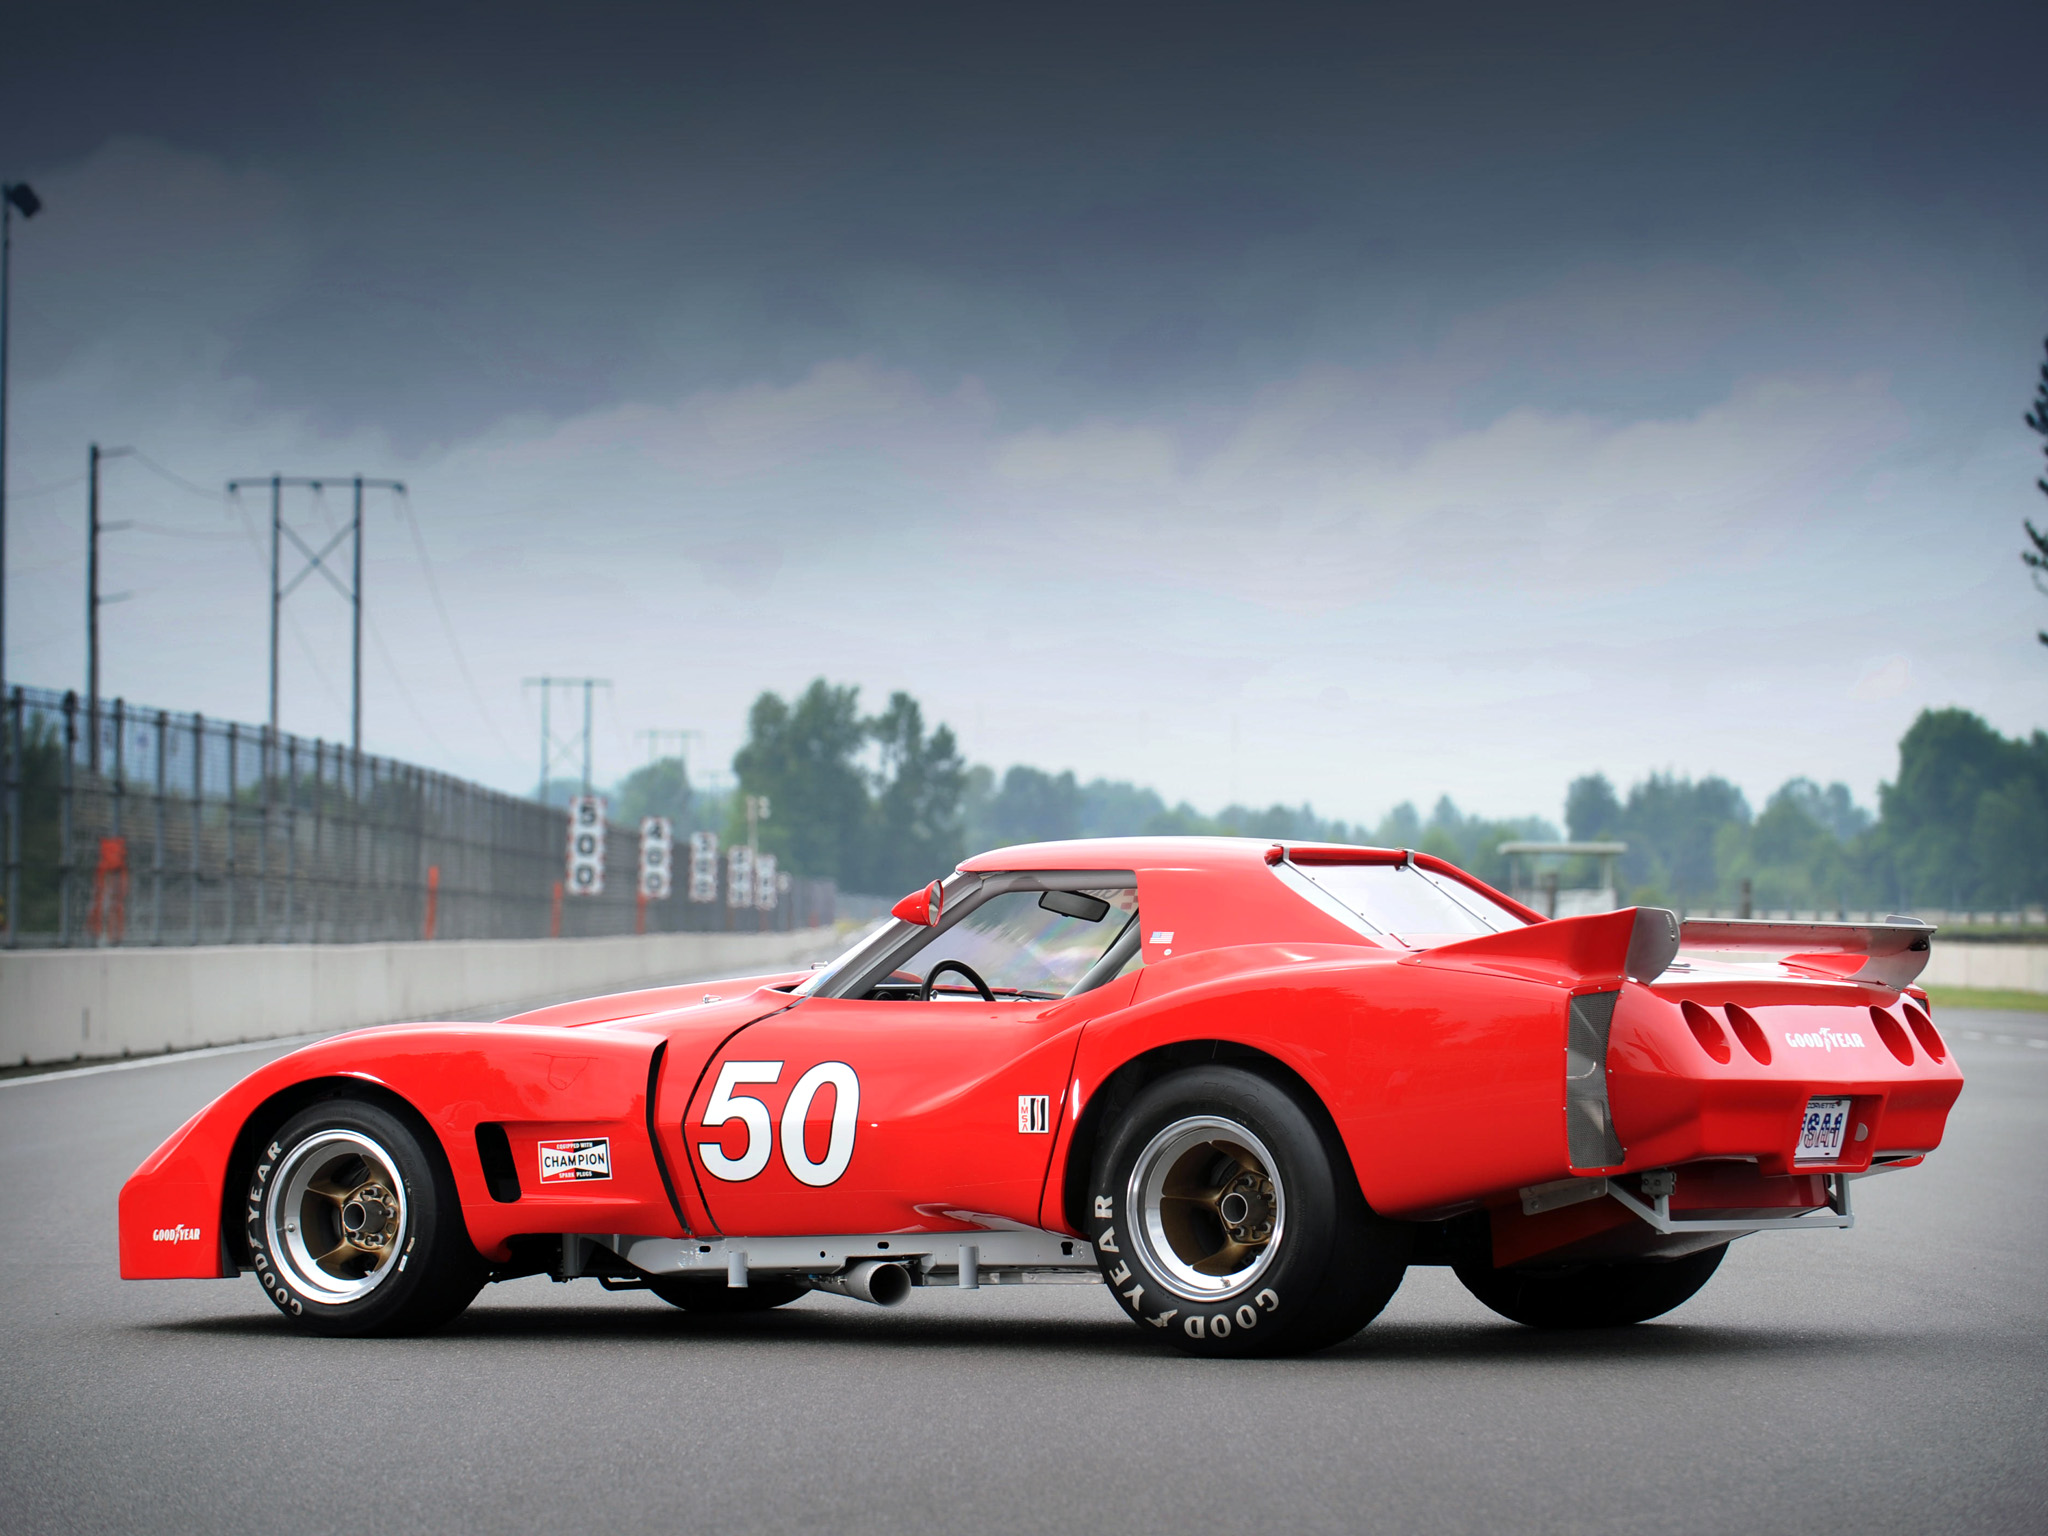 Download hd wallpapers of 117945-1977, Greenwood, Chervrolet, Corvette, Ims...